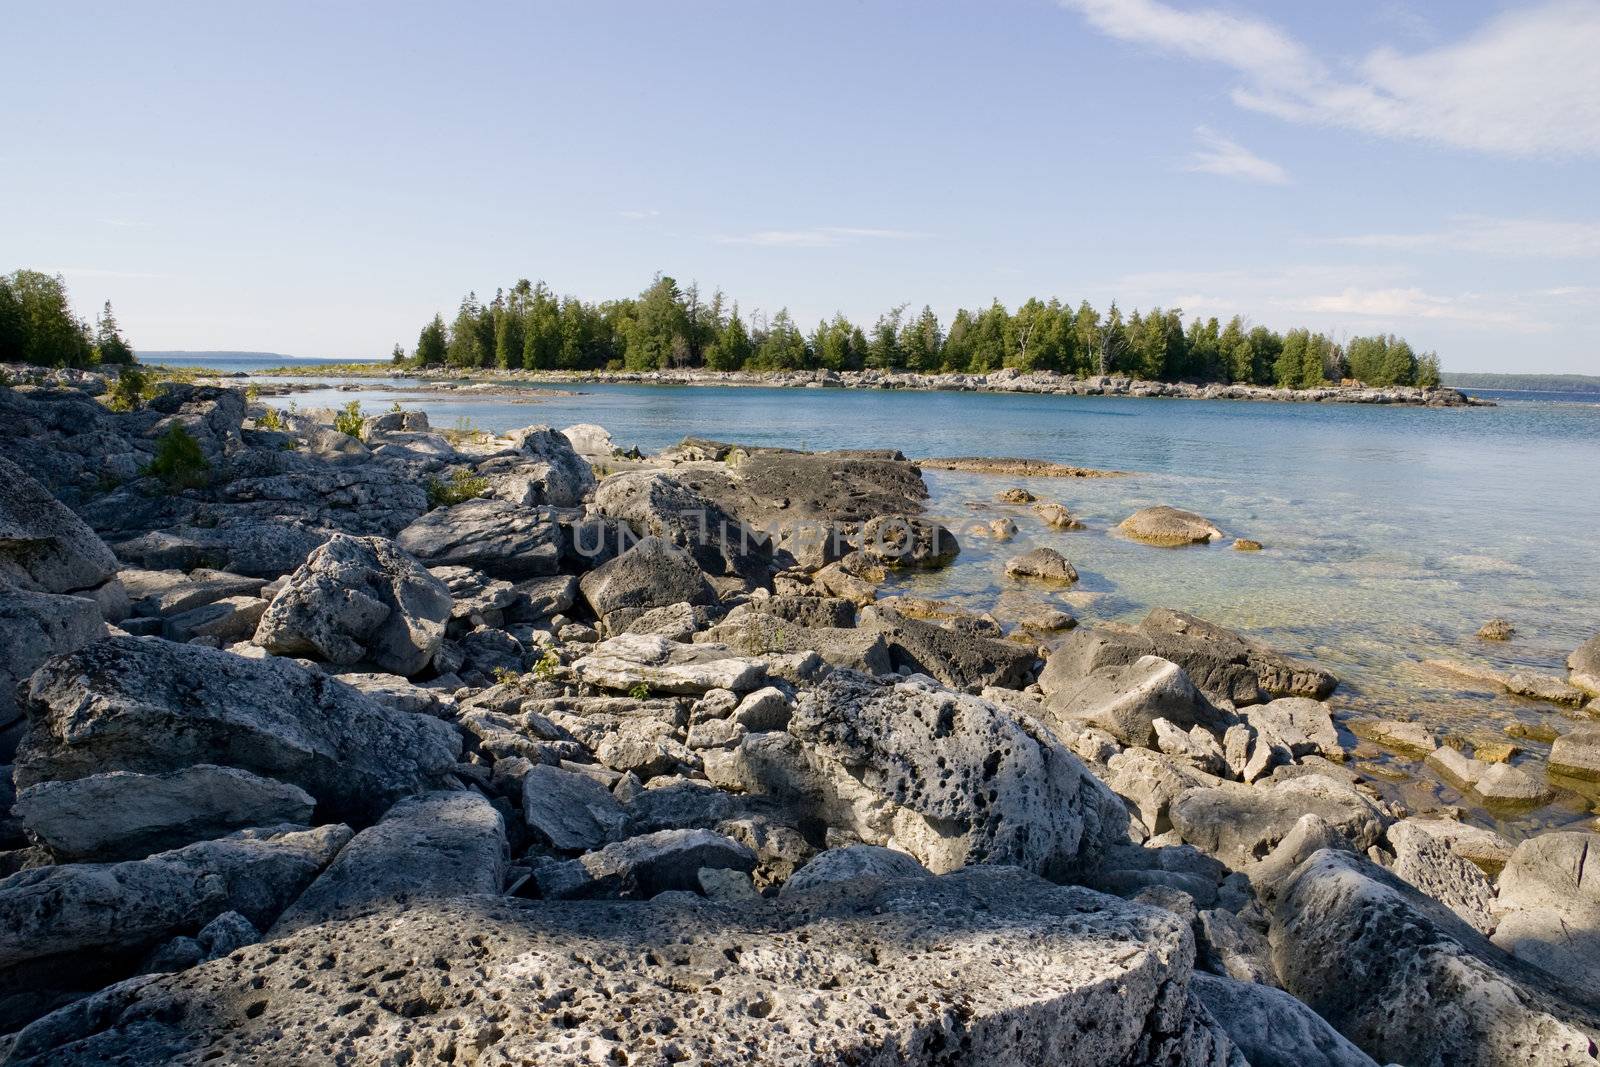 A rocky beach, clear water, clear day, and view of a small island in the distance.